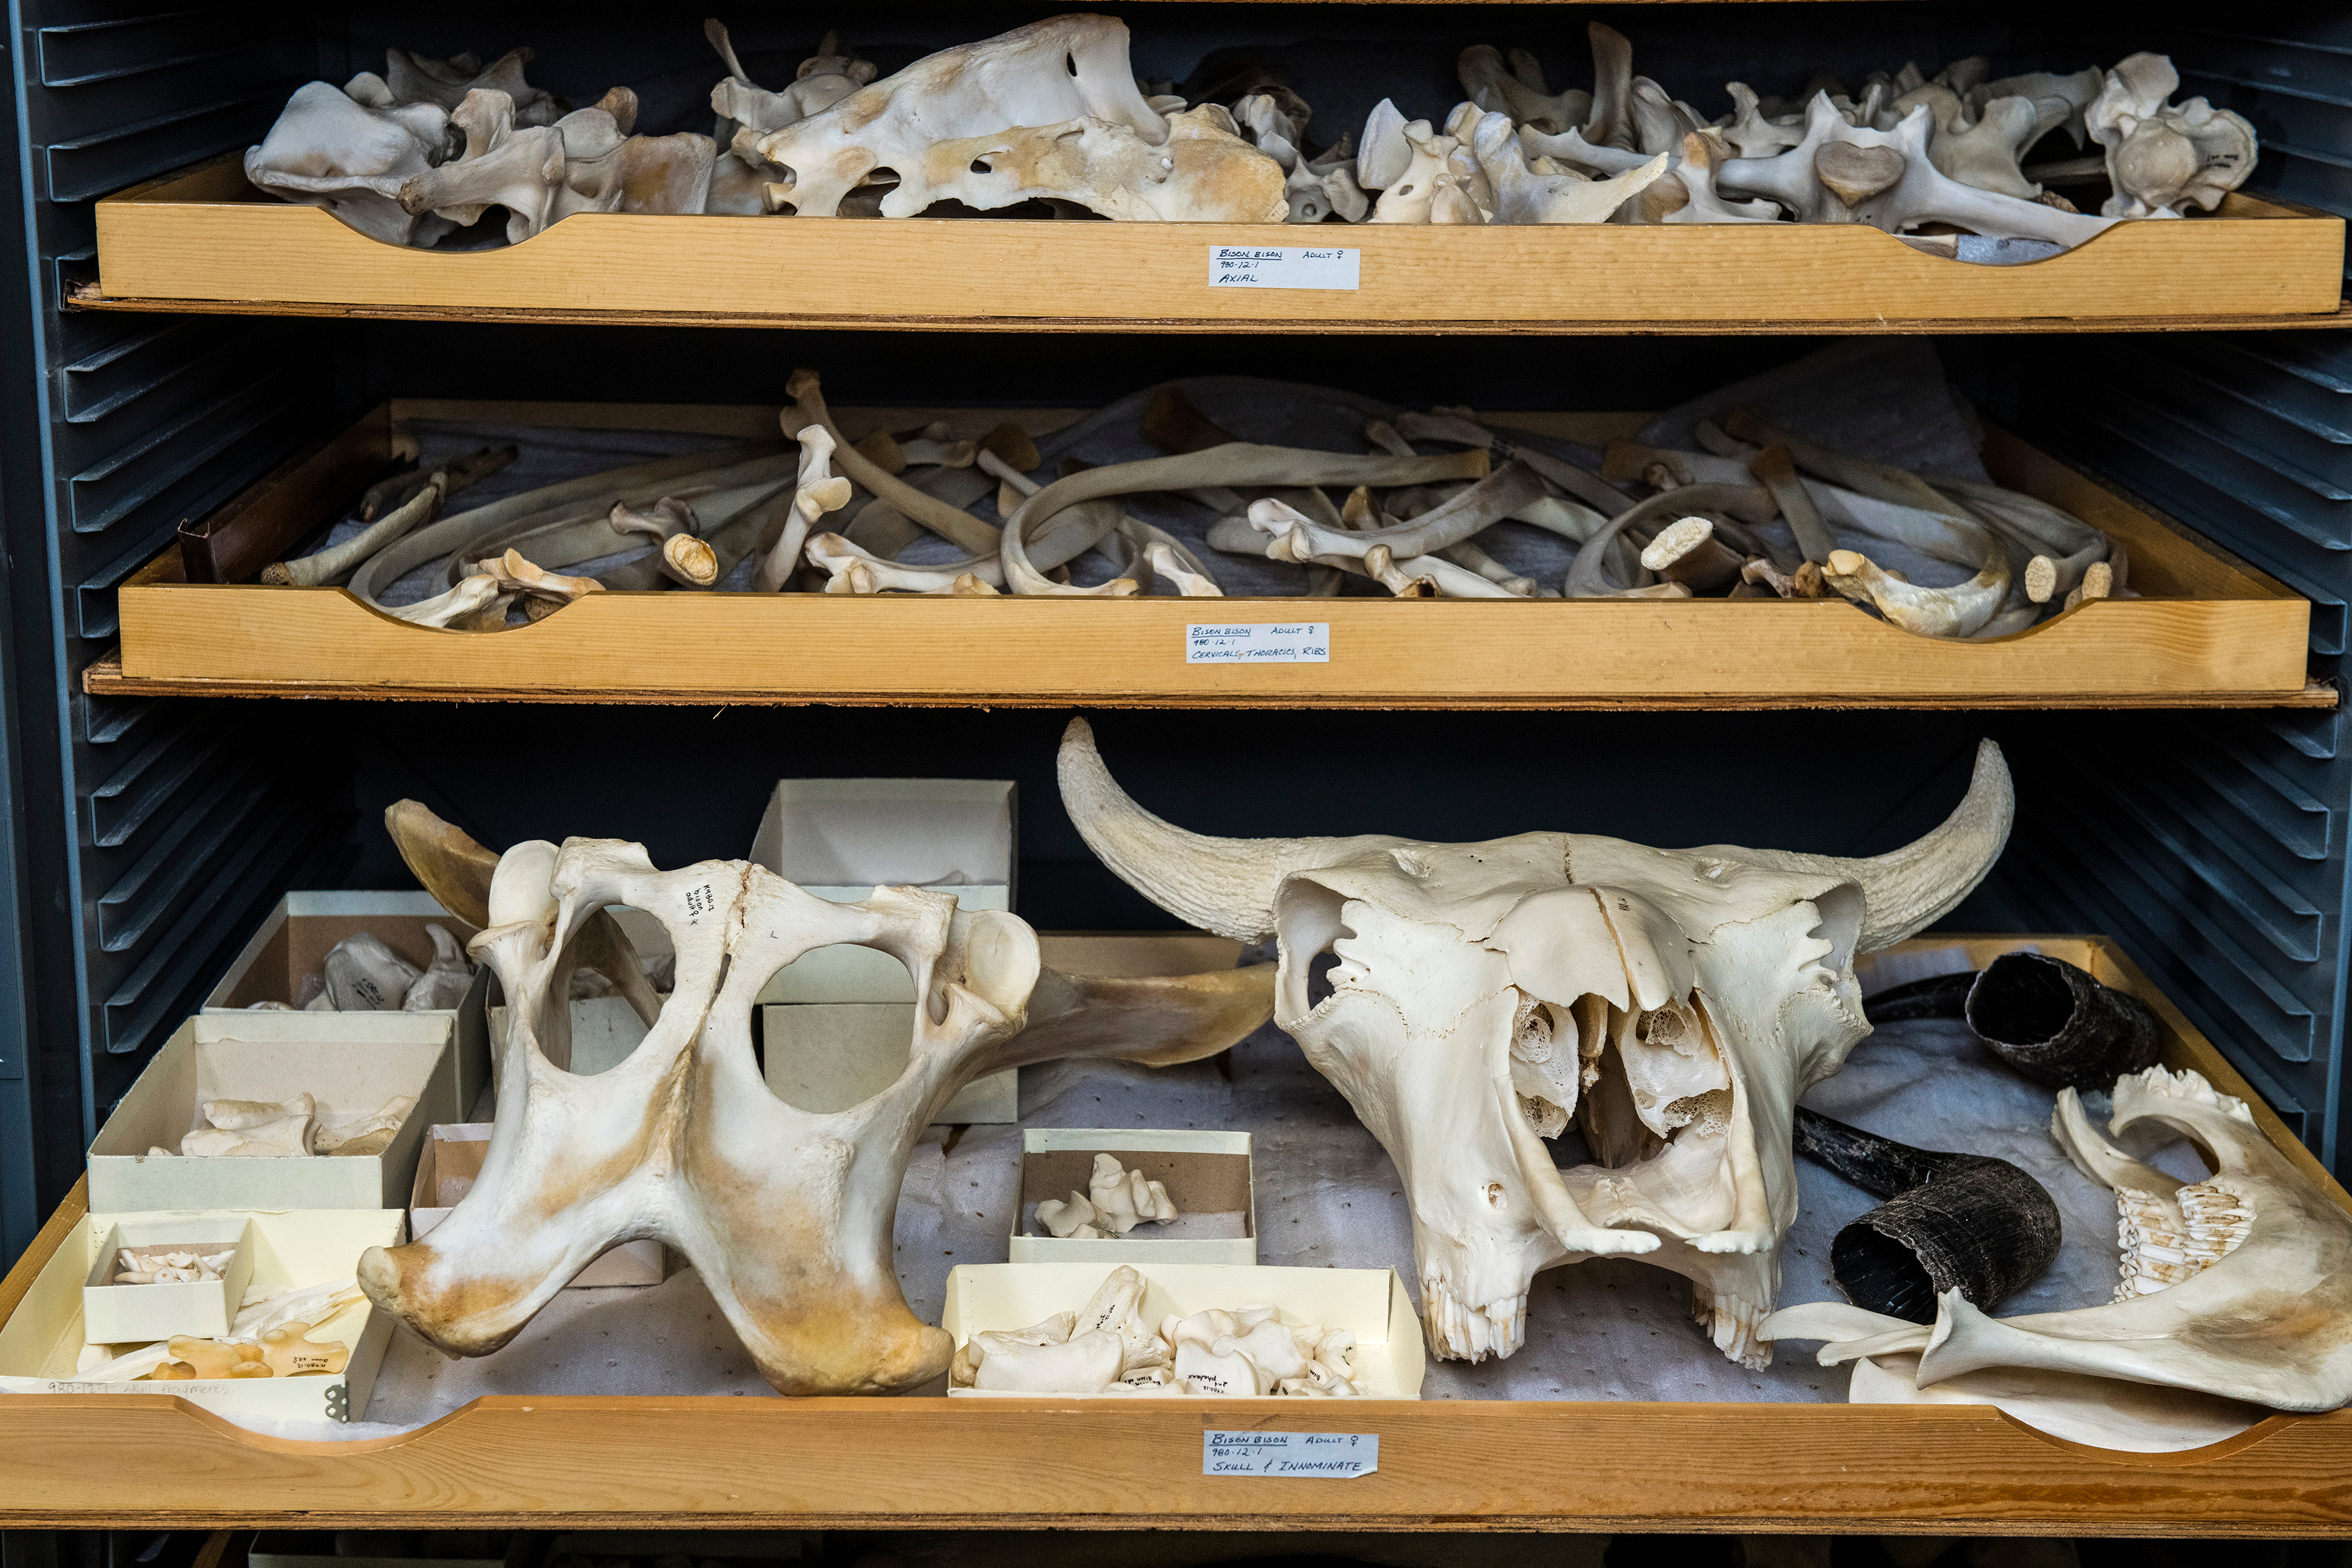 Animal skeleton specimens stored on removable wooden trays in a metal shelving unit.